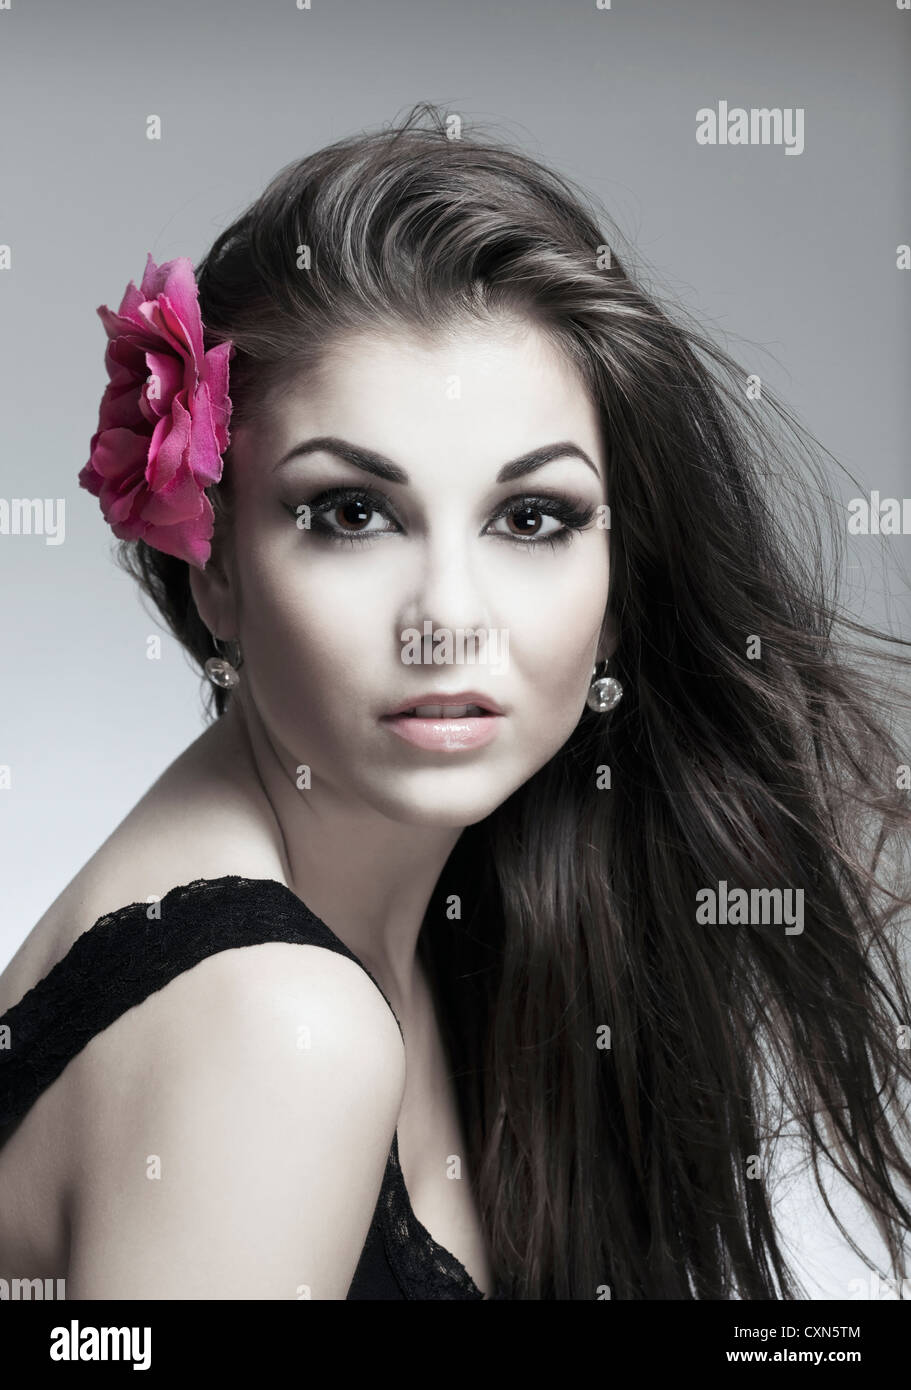 portrait of a young beautiful woman with dark hair looking Stock Photo